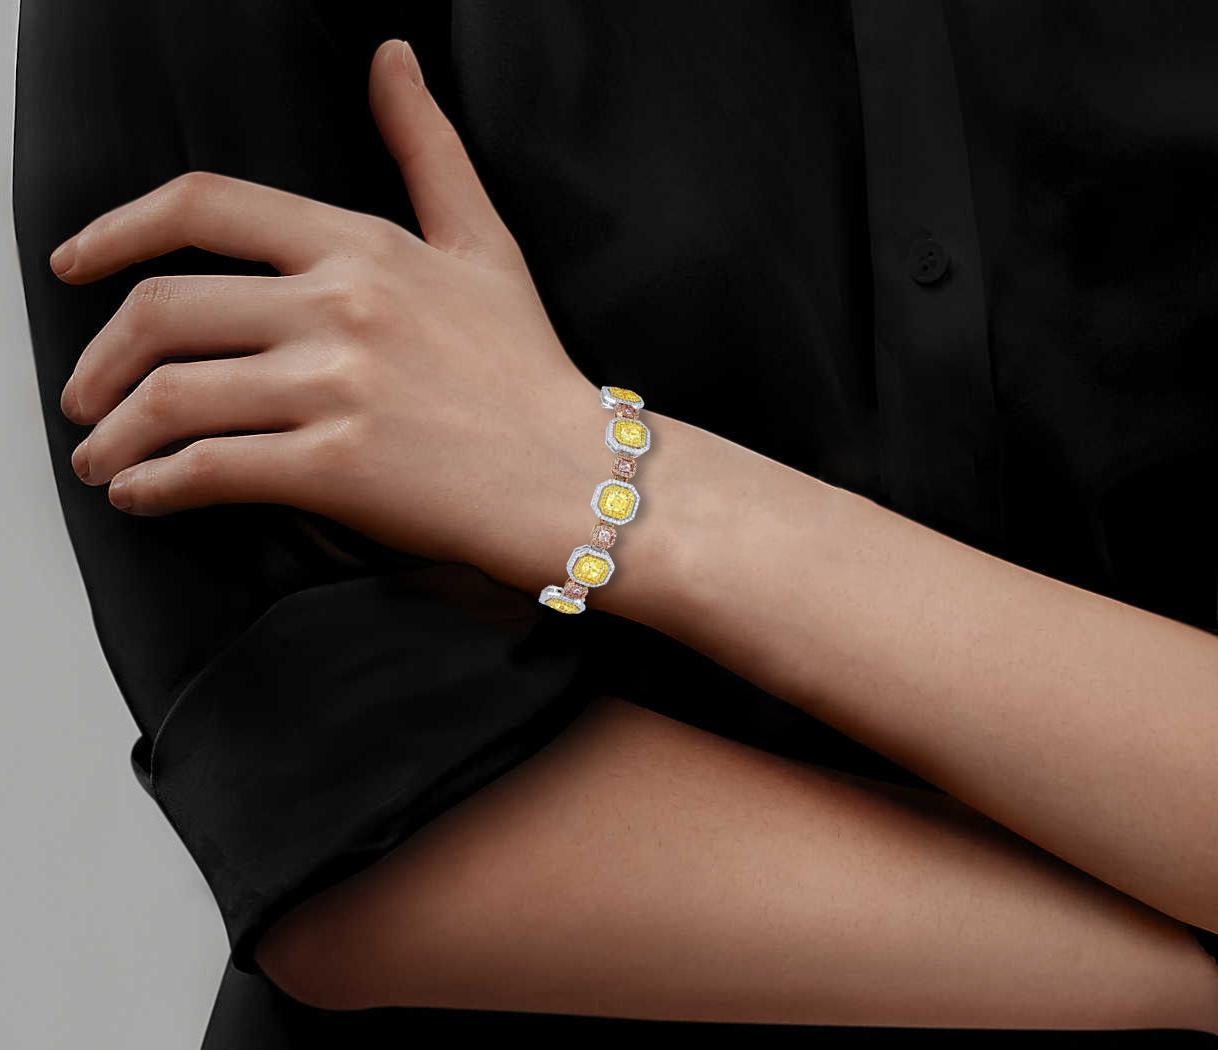 Part of our crossover collection, this bracelet is a modern take on tennis bracelets with alternating yellow and pink diamonds. Bracelet is an ode to perfection with pink and yellow diamonds cut perfectly to match each other. Each yellow diamond is